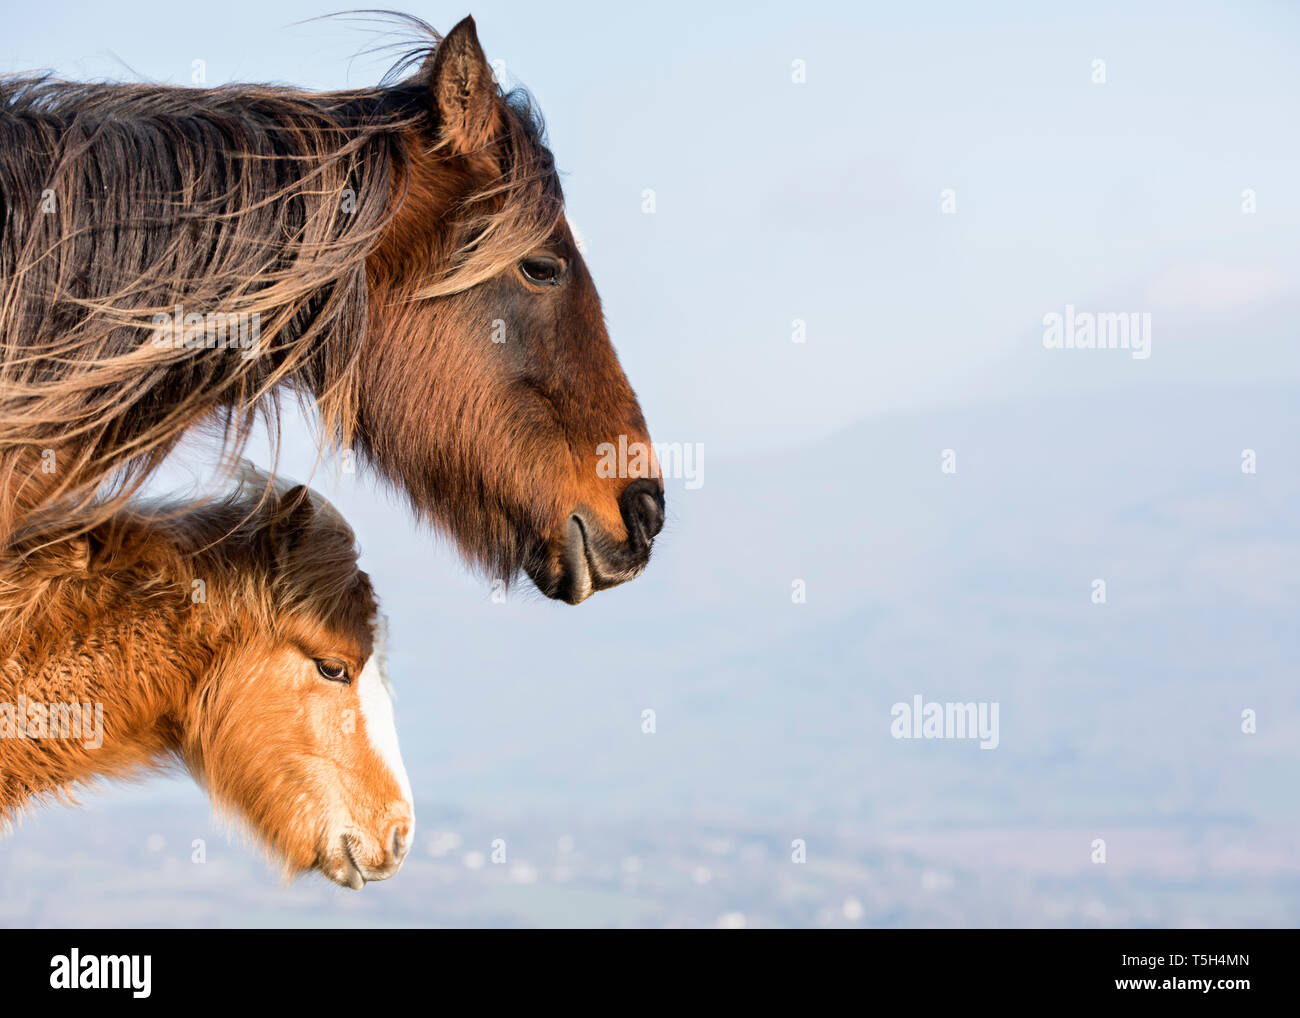 United Kingdom, Brecon Beacons, Wild Horses, mother and young animal Stock Photo